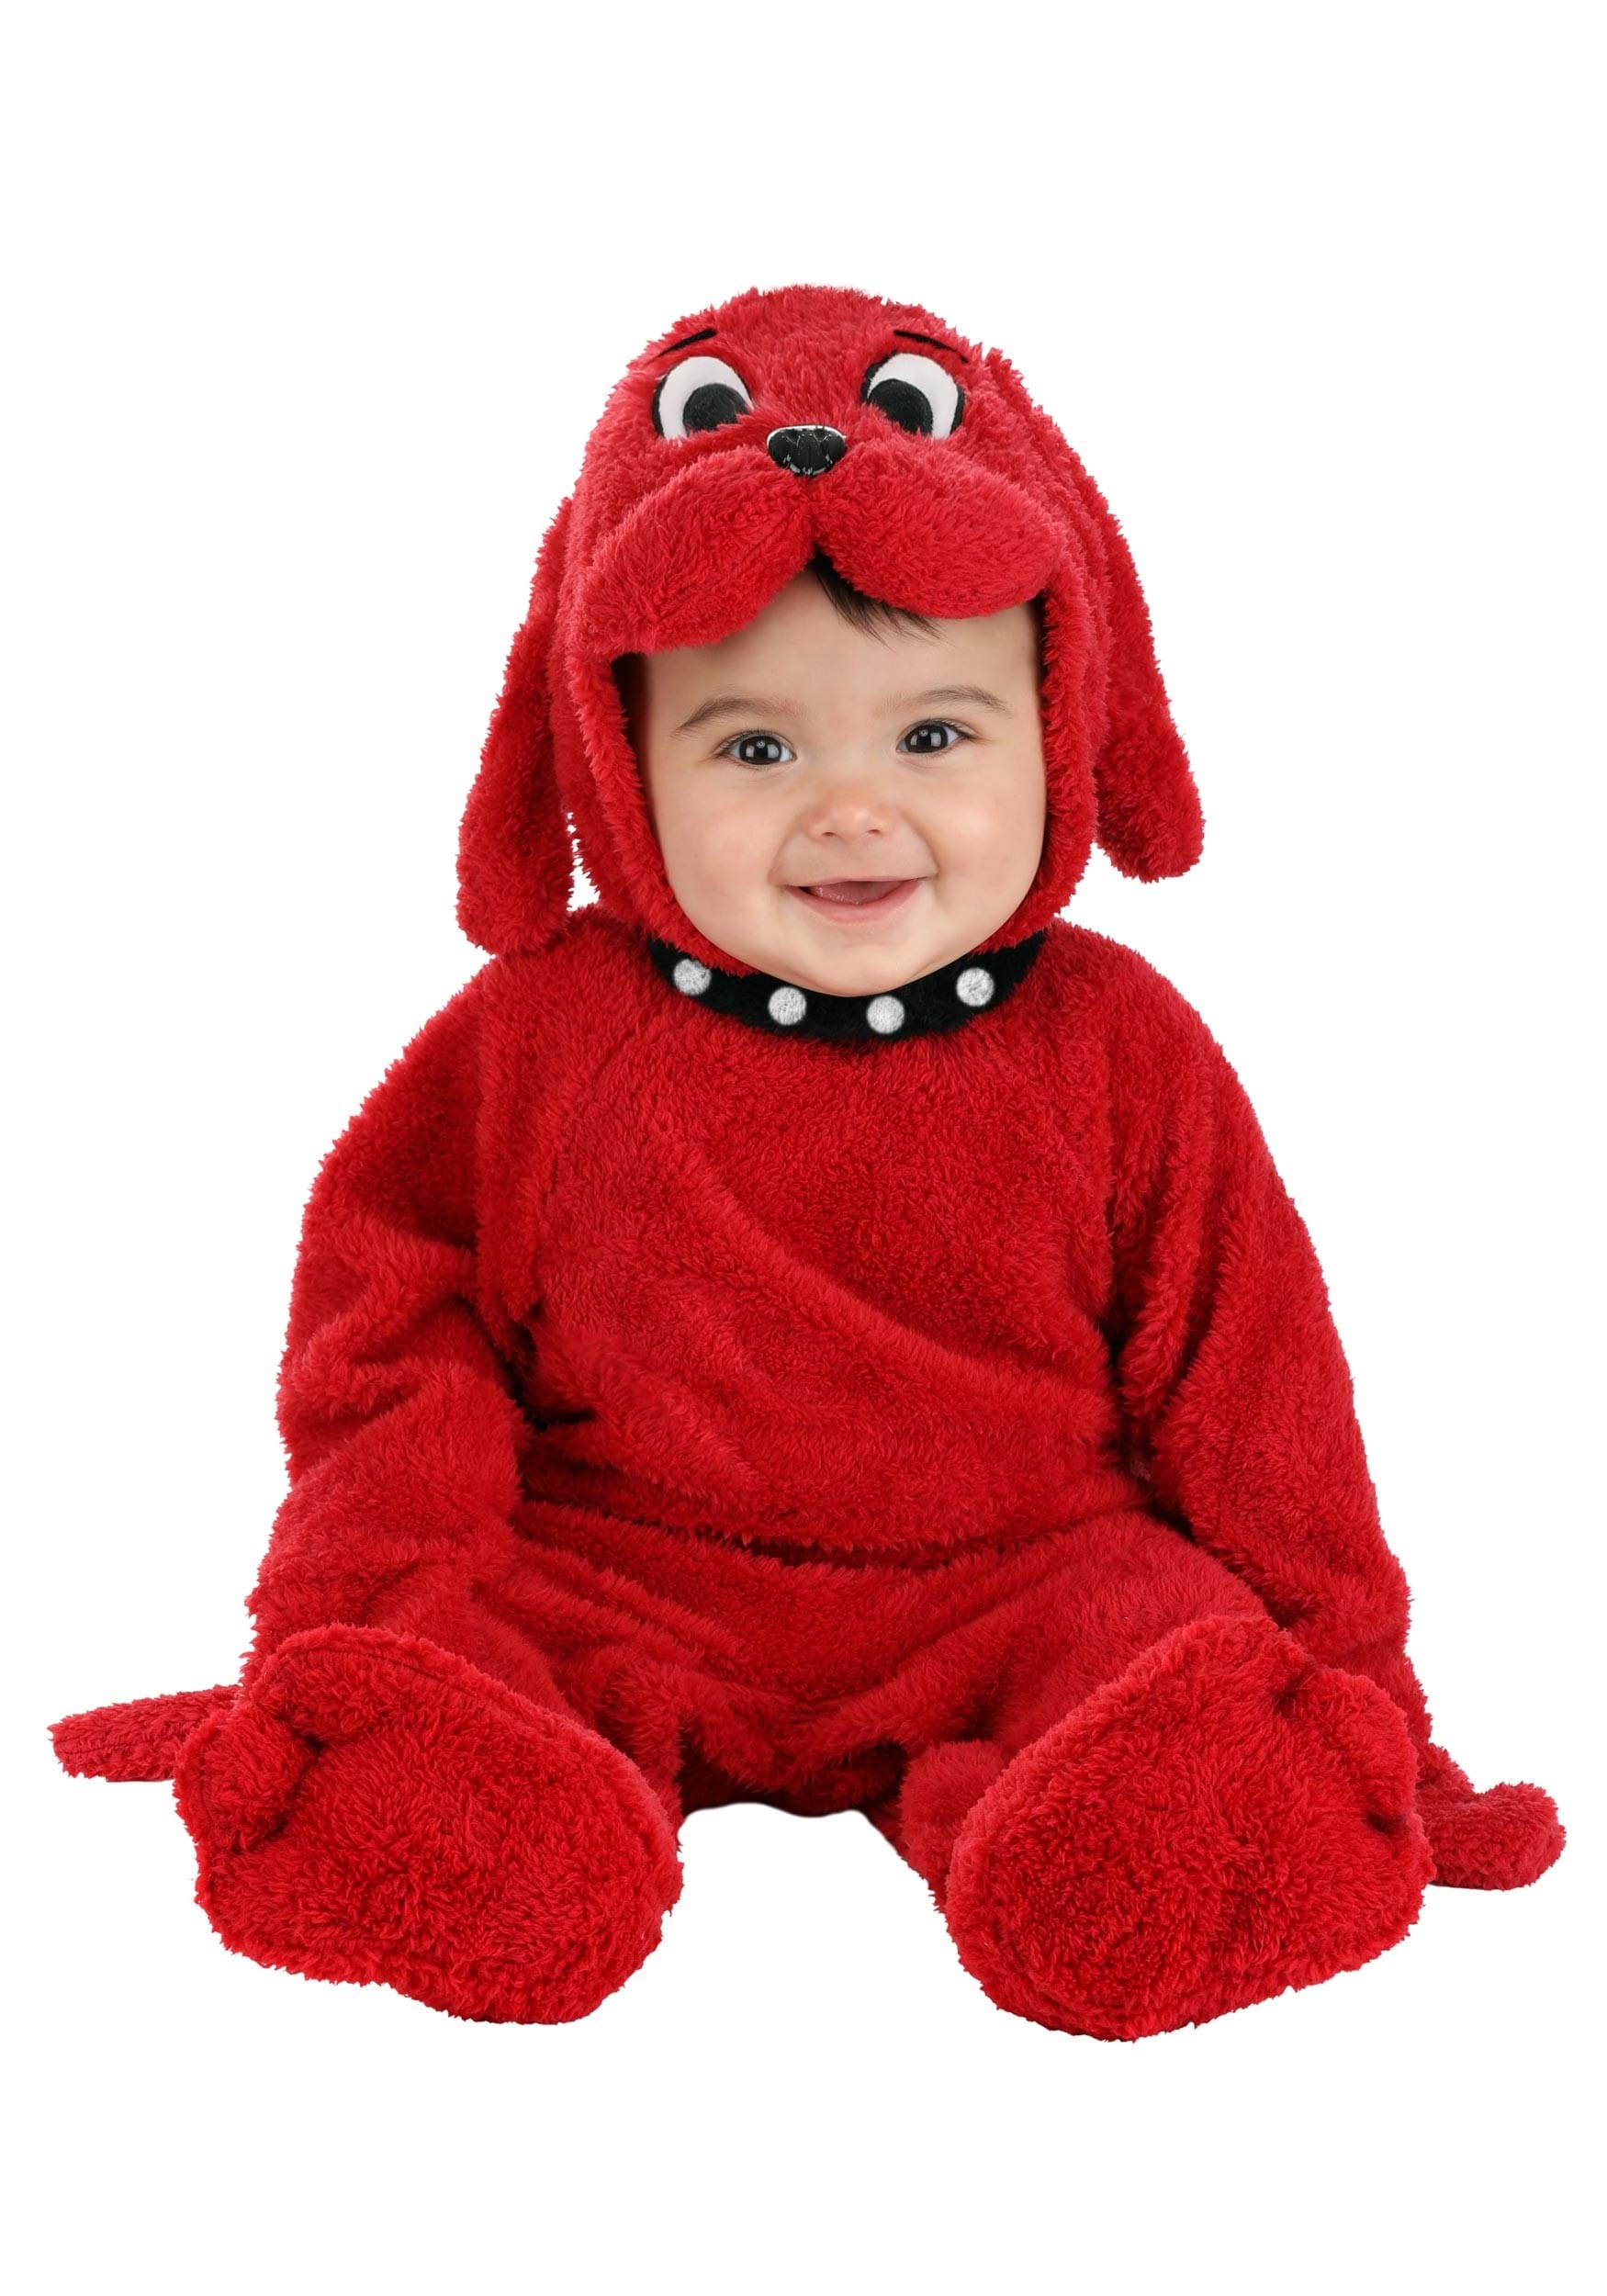 Clifford the Big Red Dog Infant Costume | TV Show Costumes